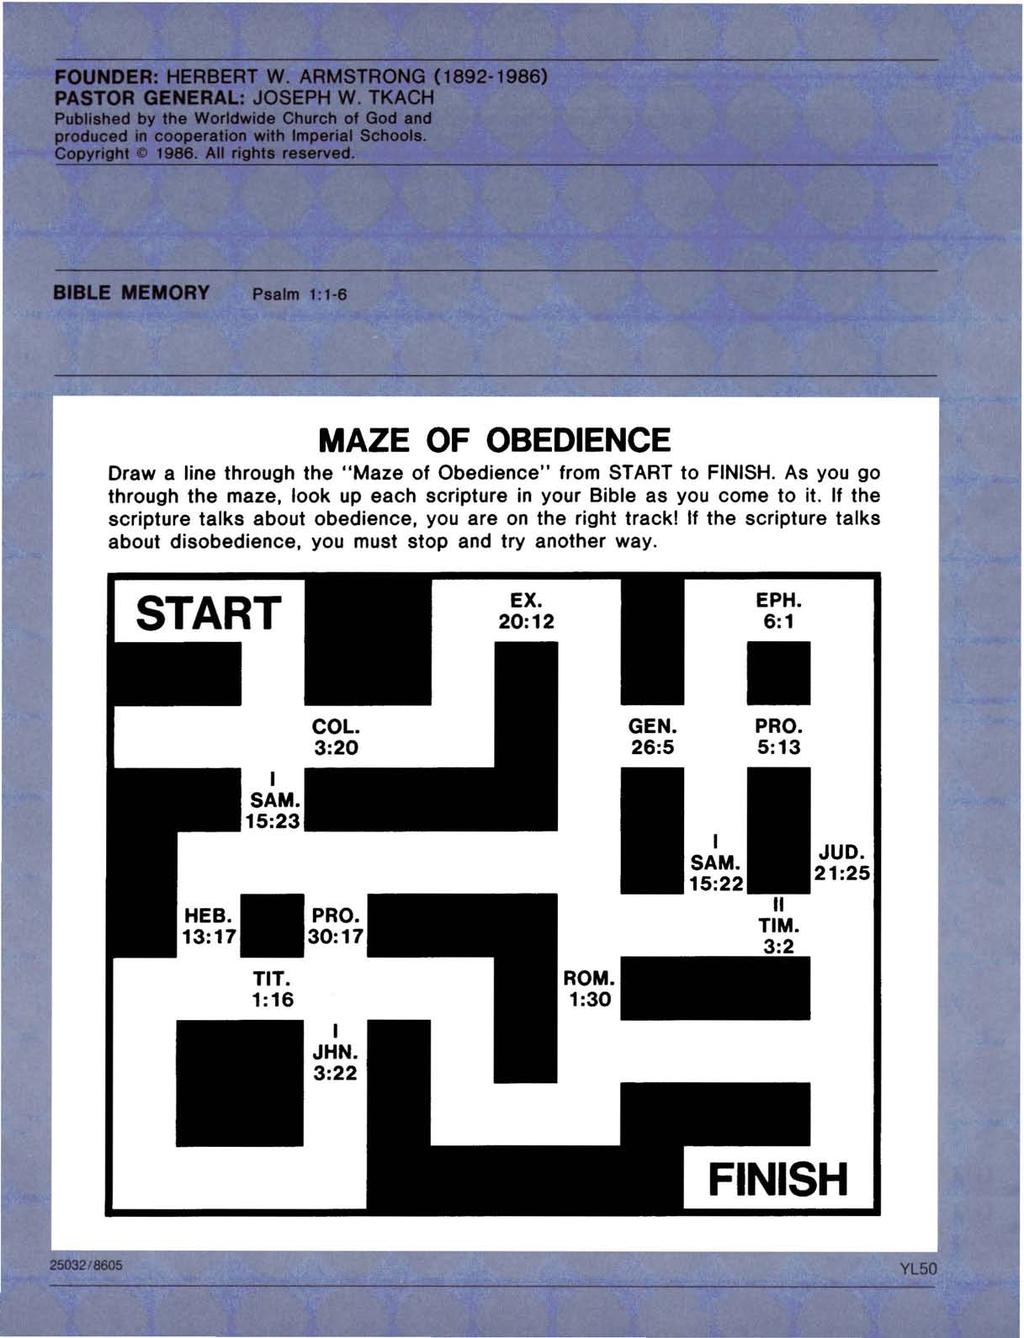 MAZE OF OBEDIENCE Draw a line through the "Maze of Obedience" from START to FINISH. As you go through the maze, look up each scripture in your Bible as you come to it.